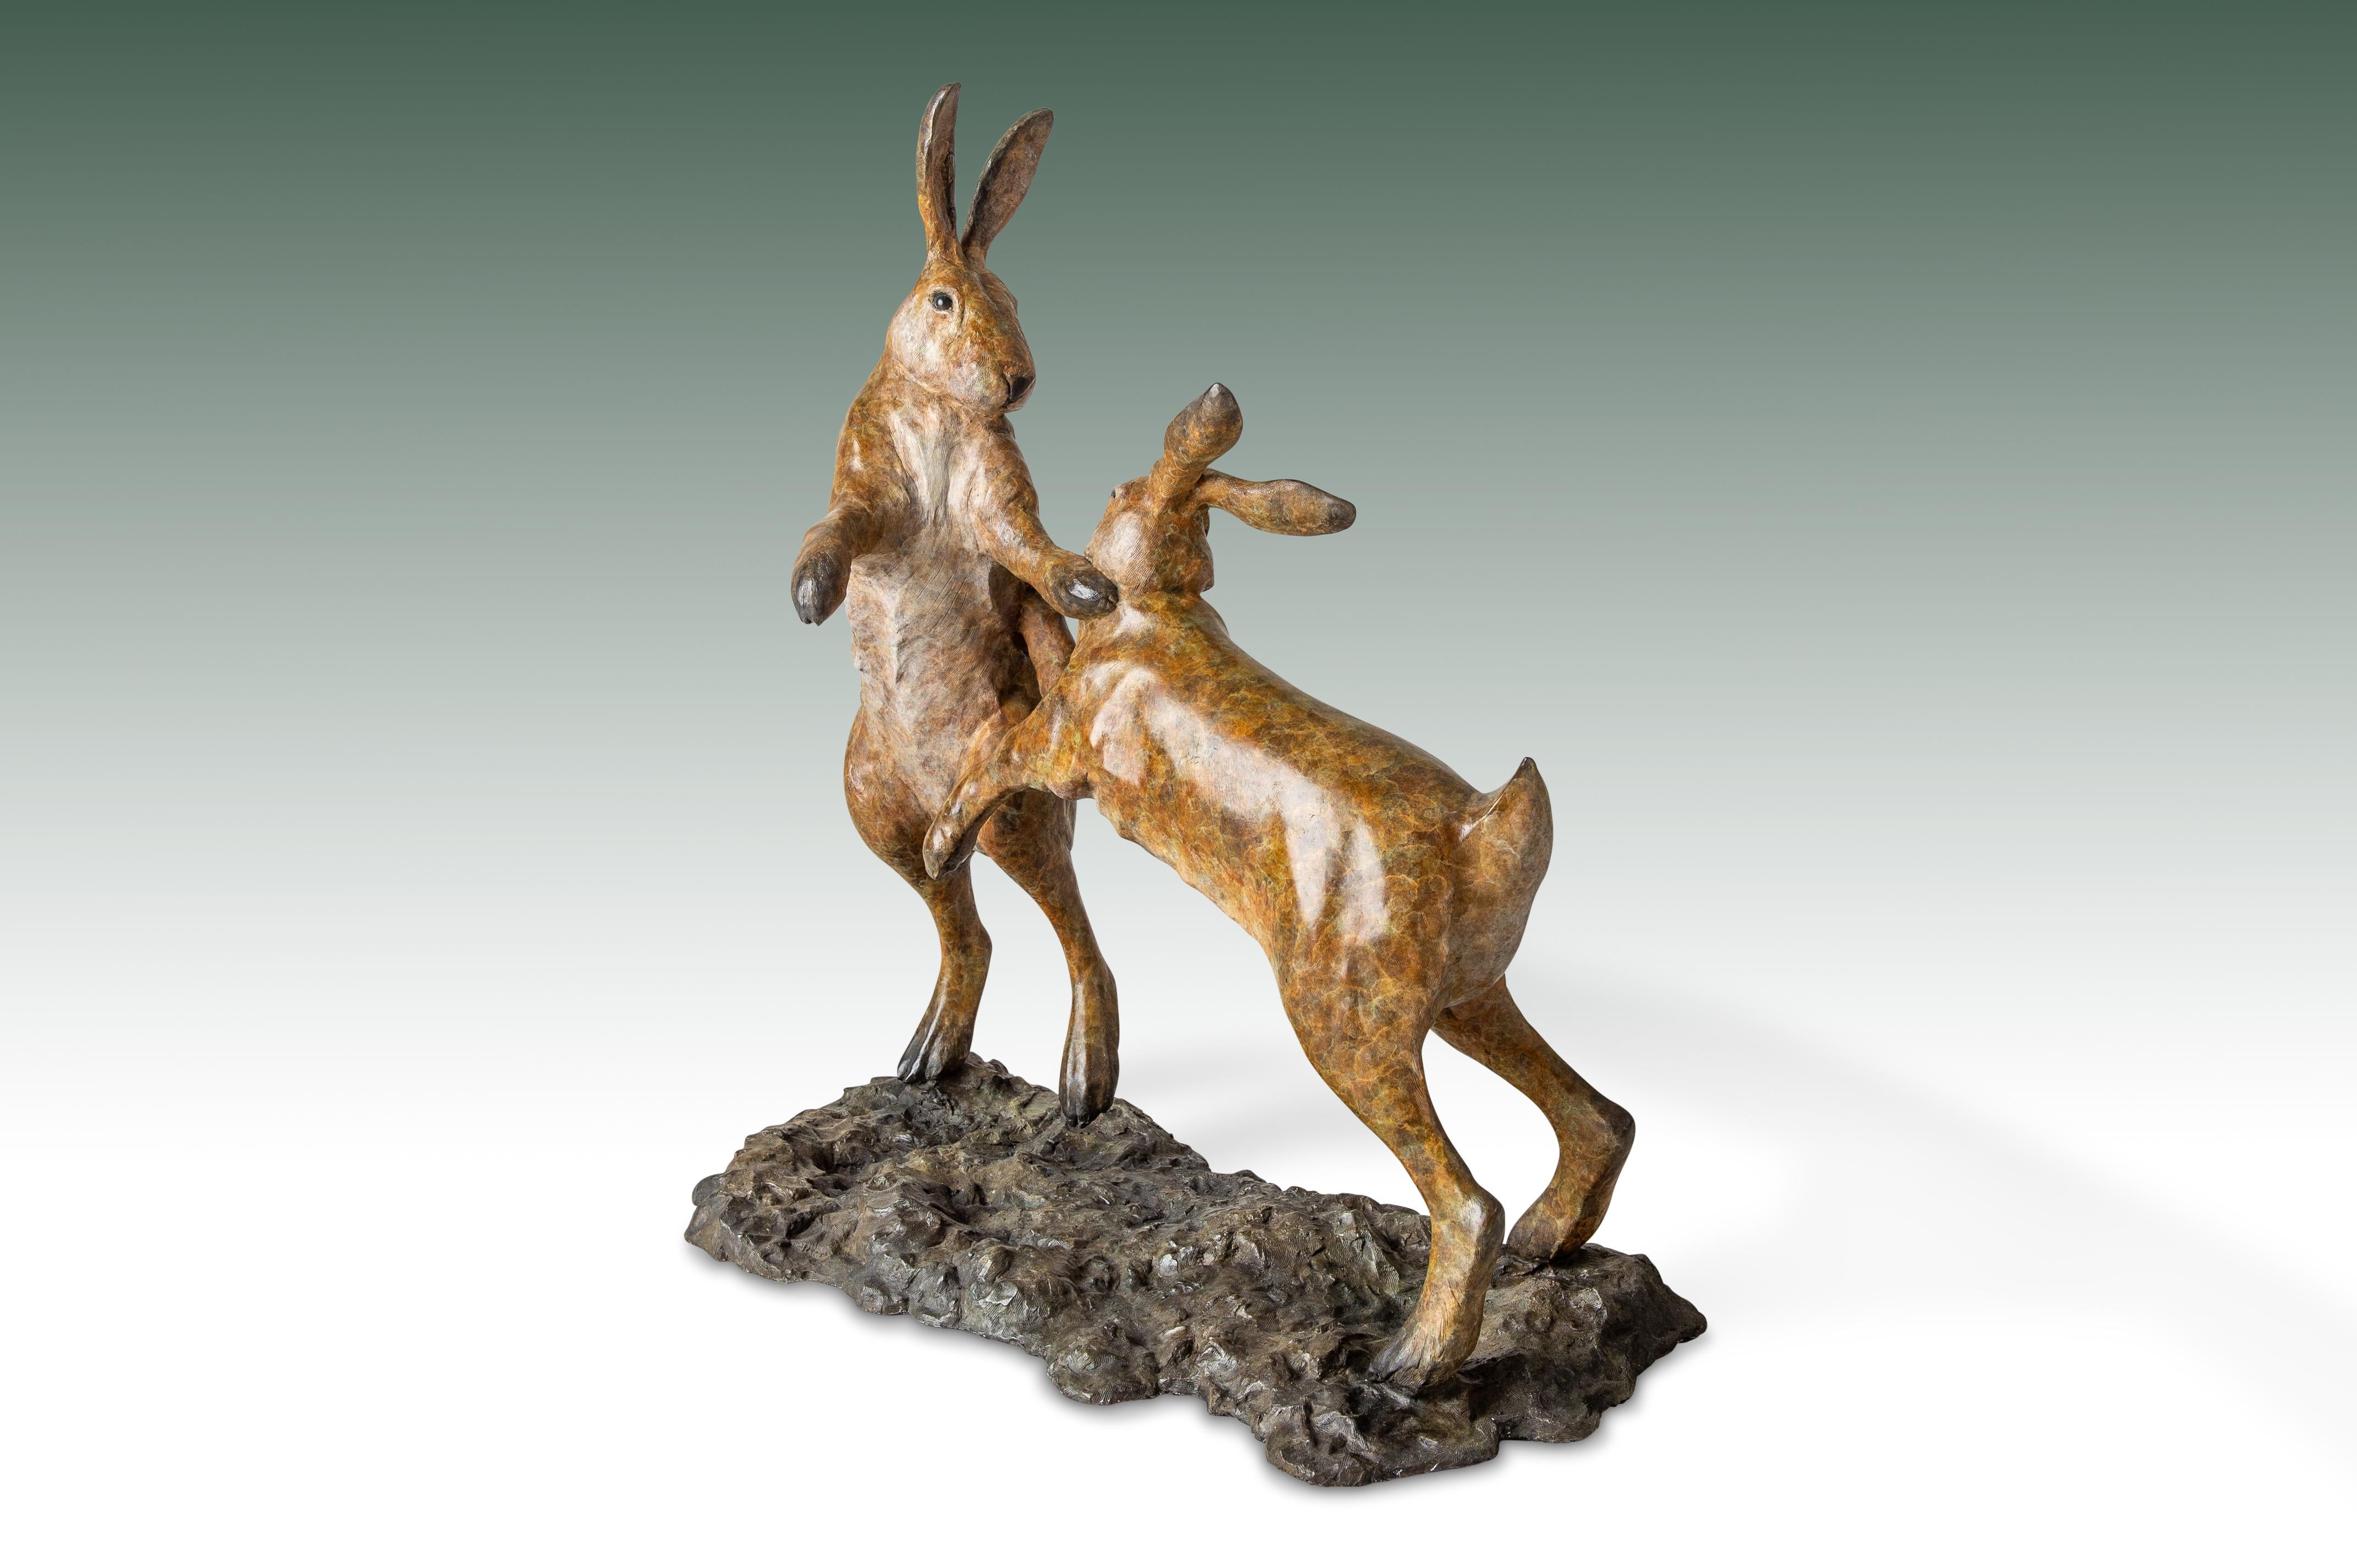 Tobias Martin Figurative Sculpture - 'Boxing Hares' Bronze Sculpture of two fighting hares, patinated brown, wildlife